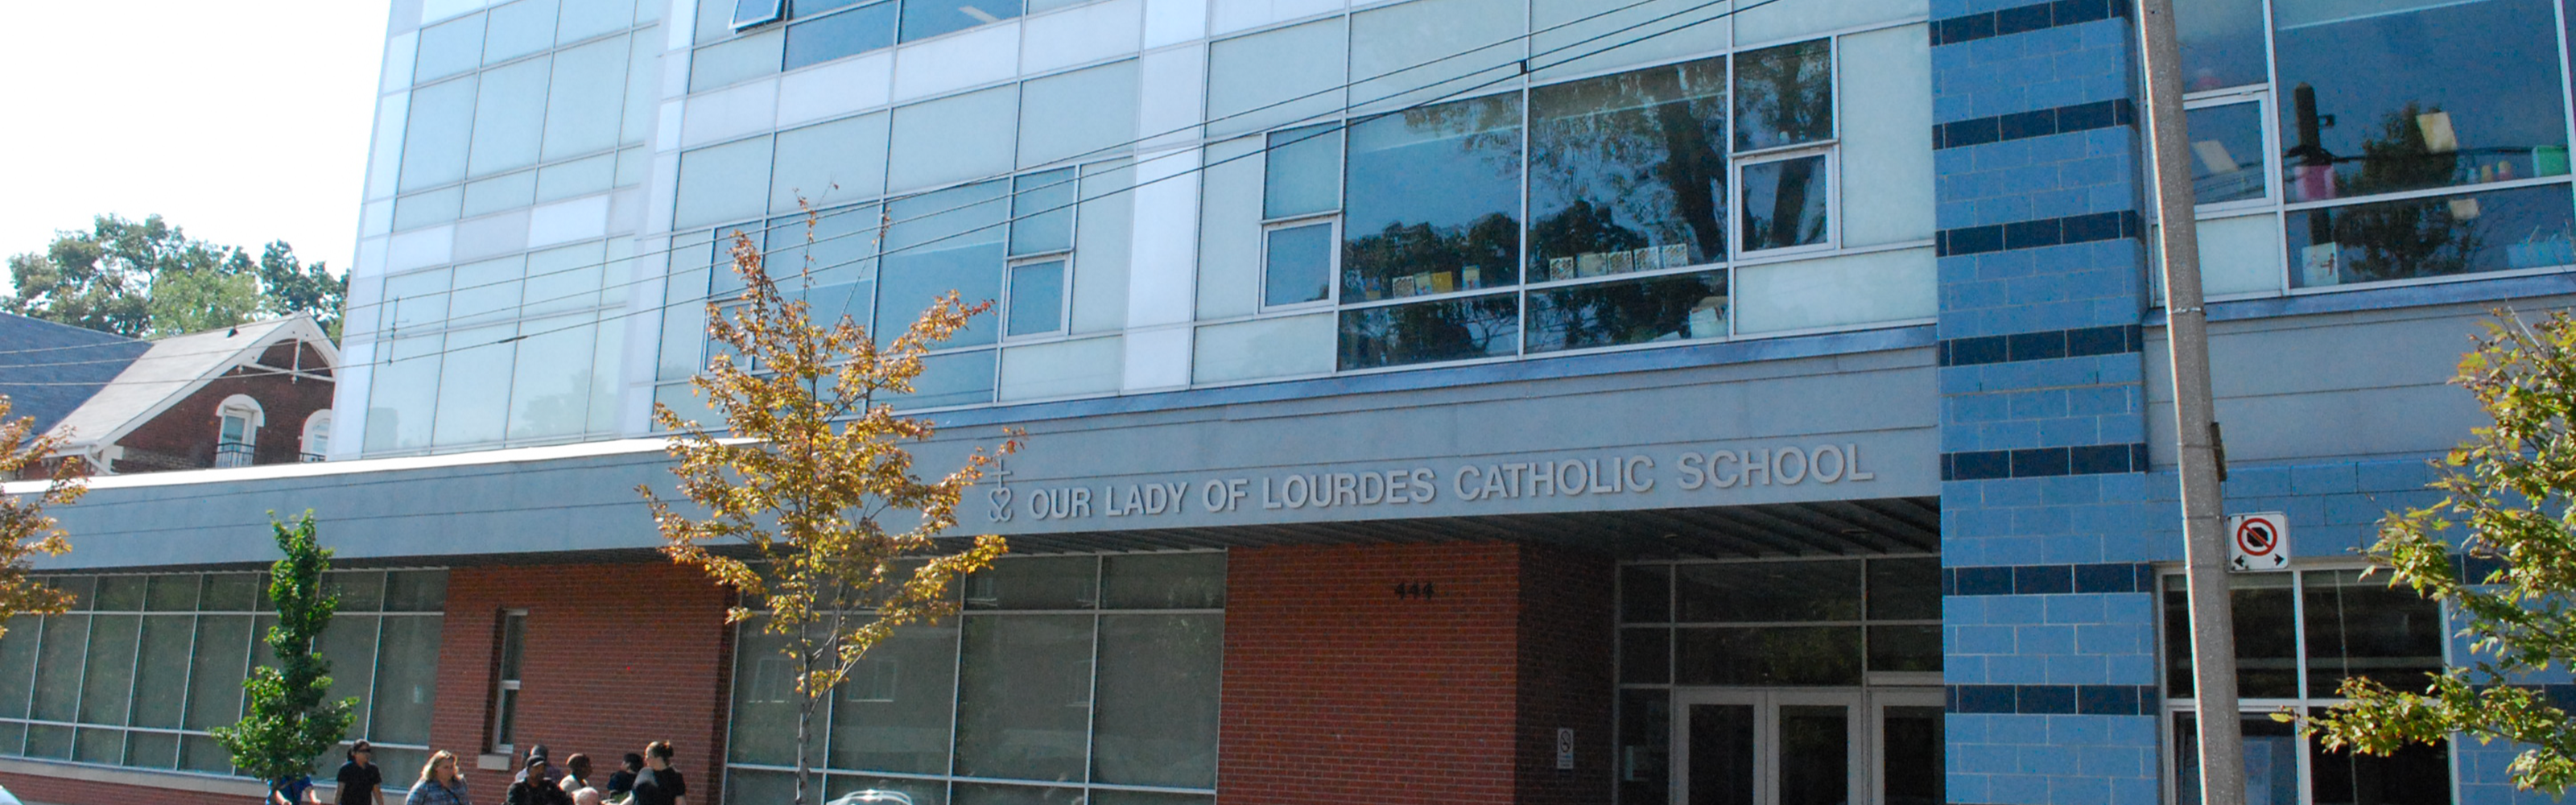 The front of the Our Lady of Lourdes Catholic School building.